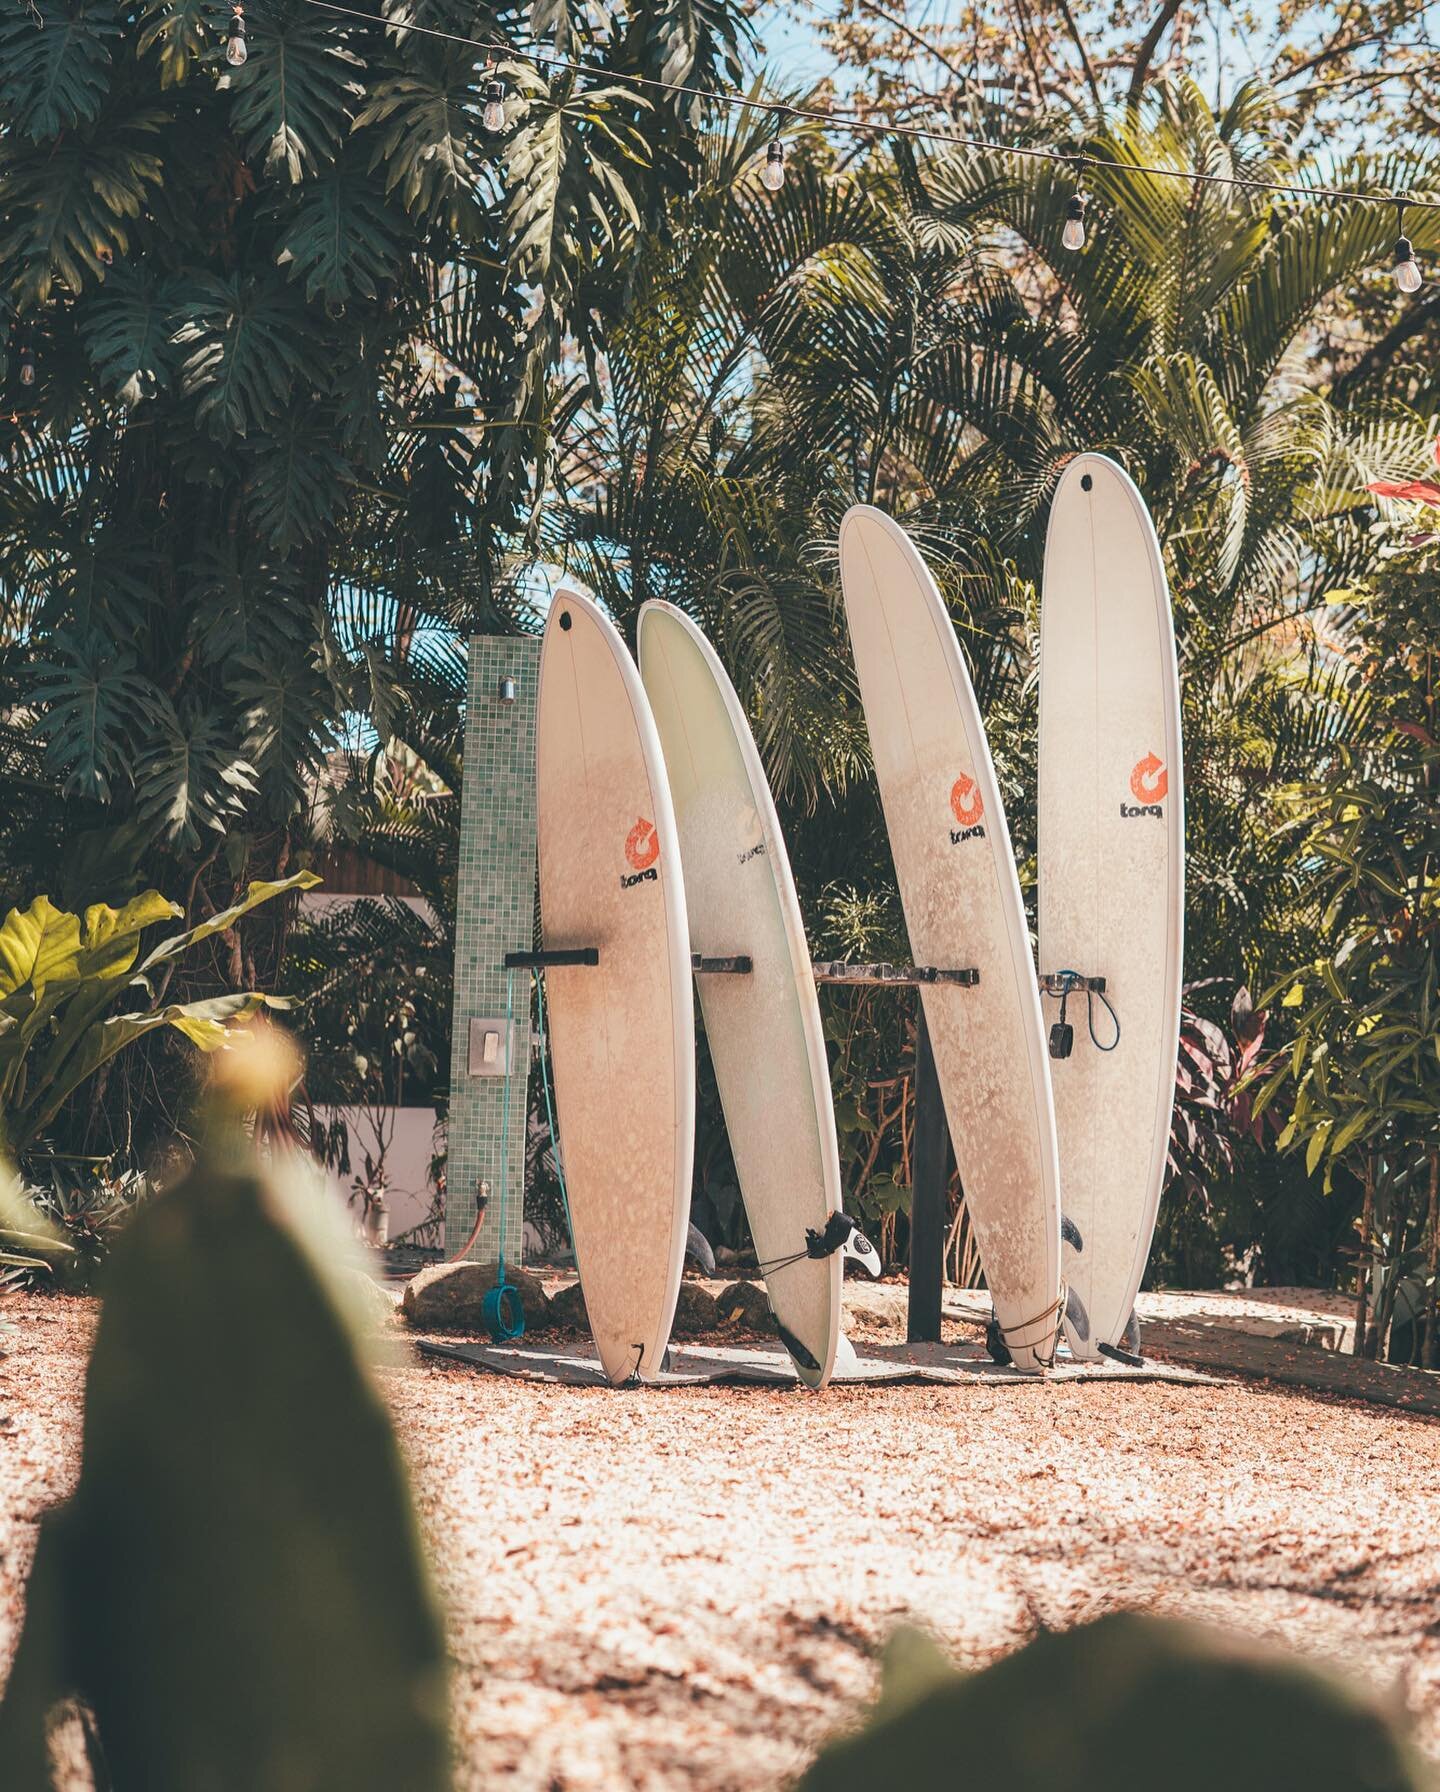 Summer Sunday // from short to long boards, and everything in-between, we&rsquo;ve got you covered for condition and skill level with our quiver of @torqsurfboards